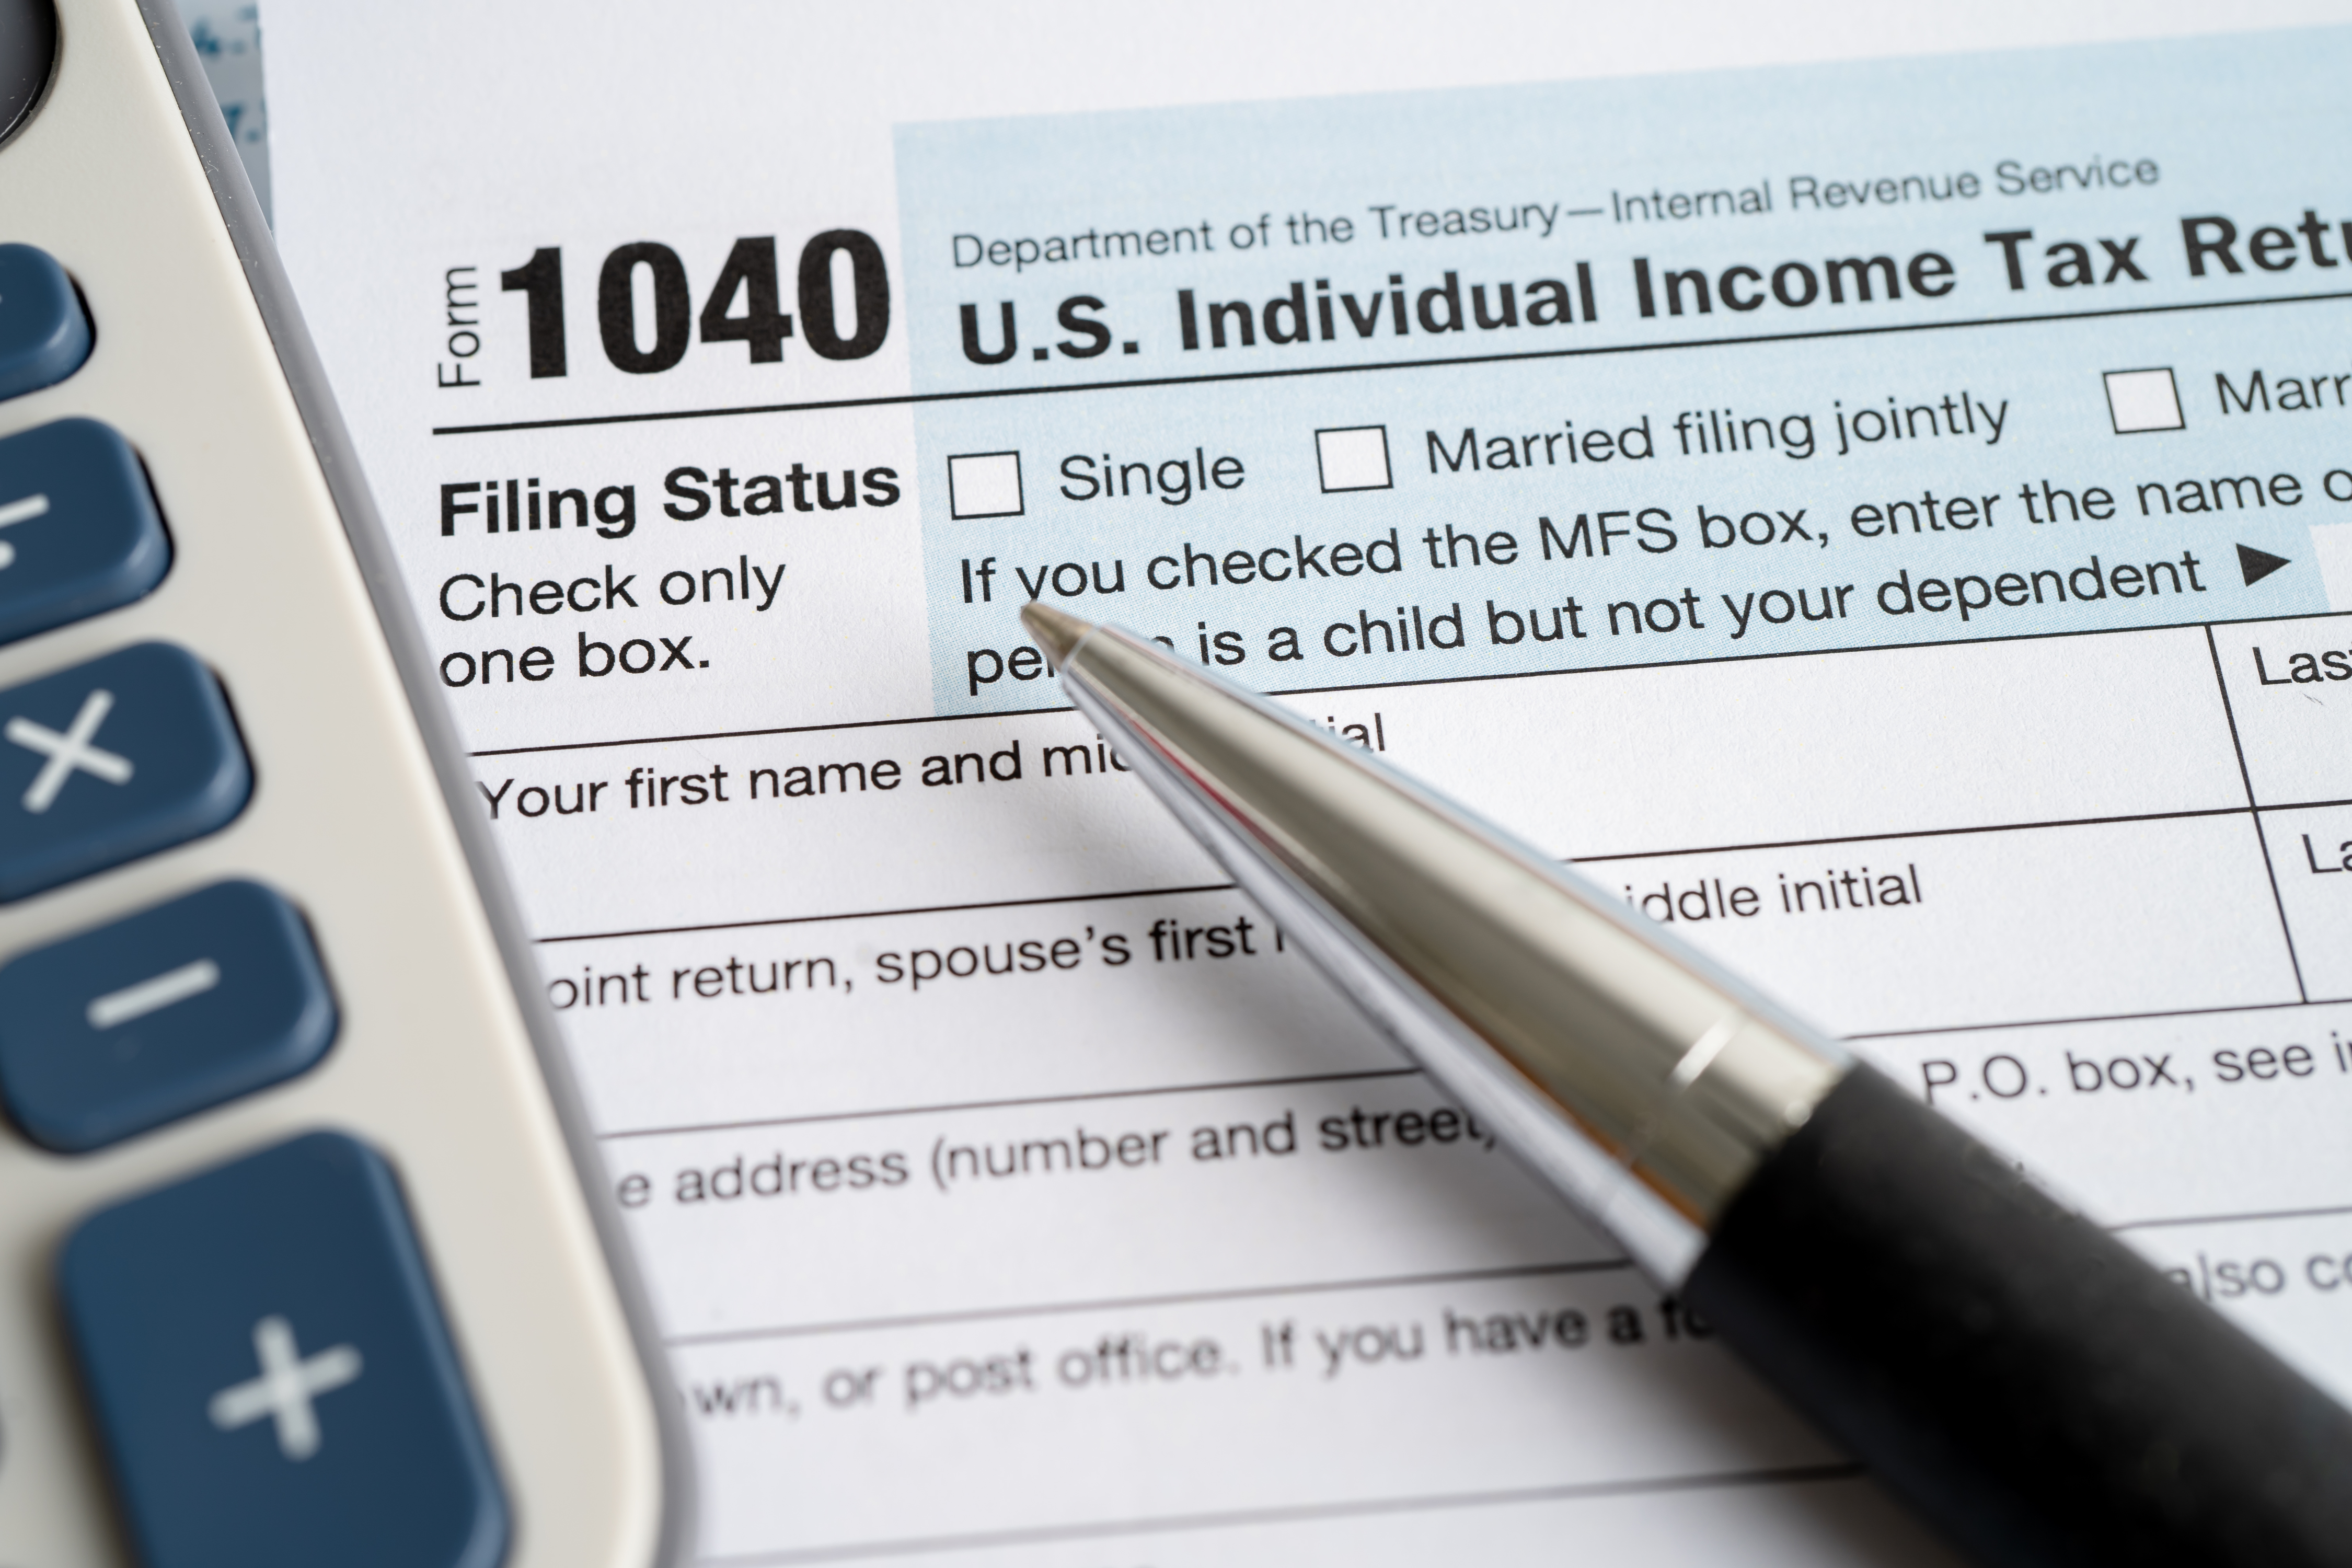 What do we need to know about tax filing and tax scams?